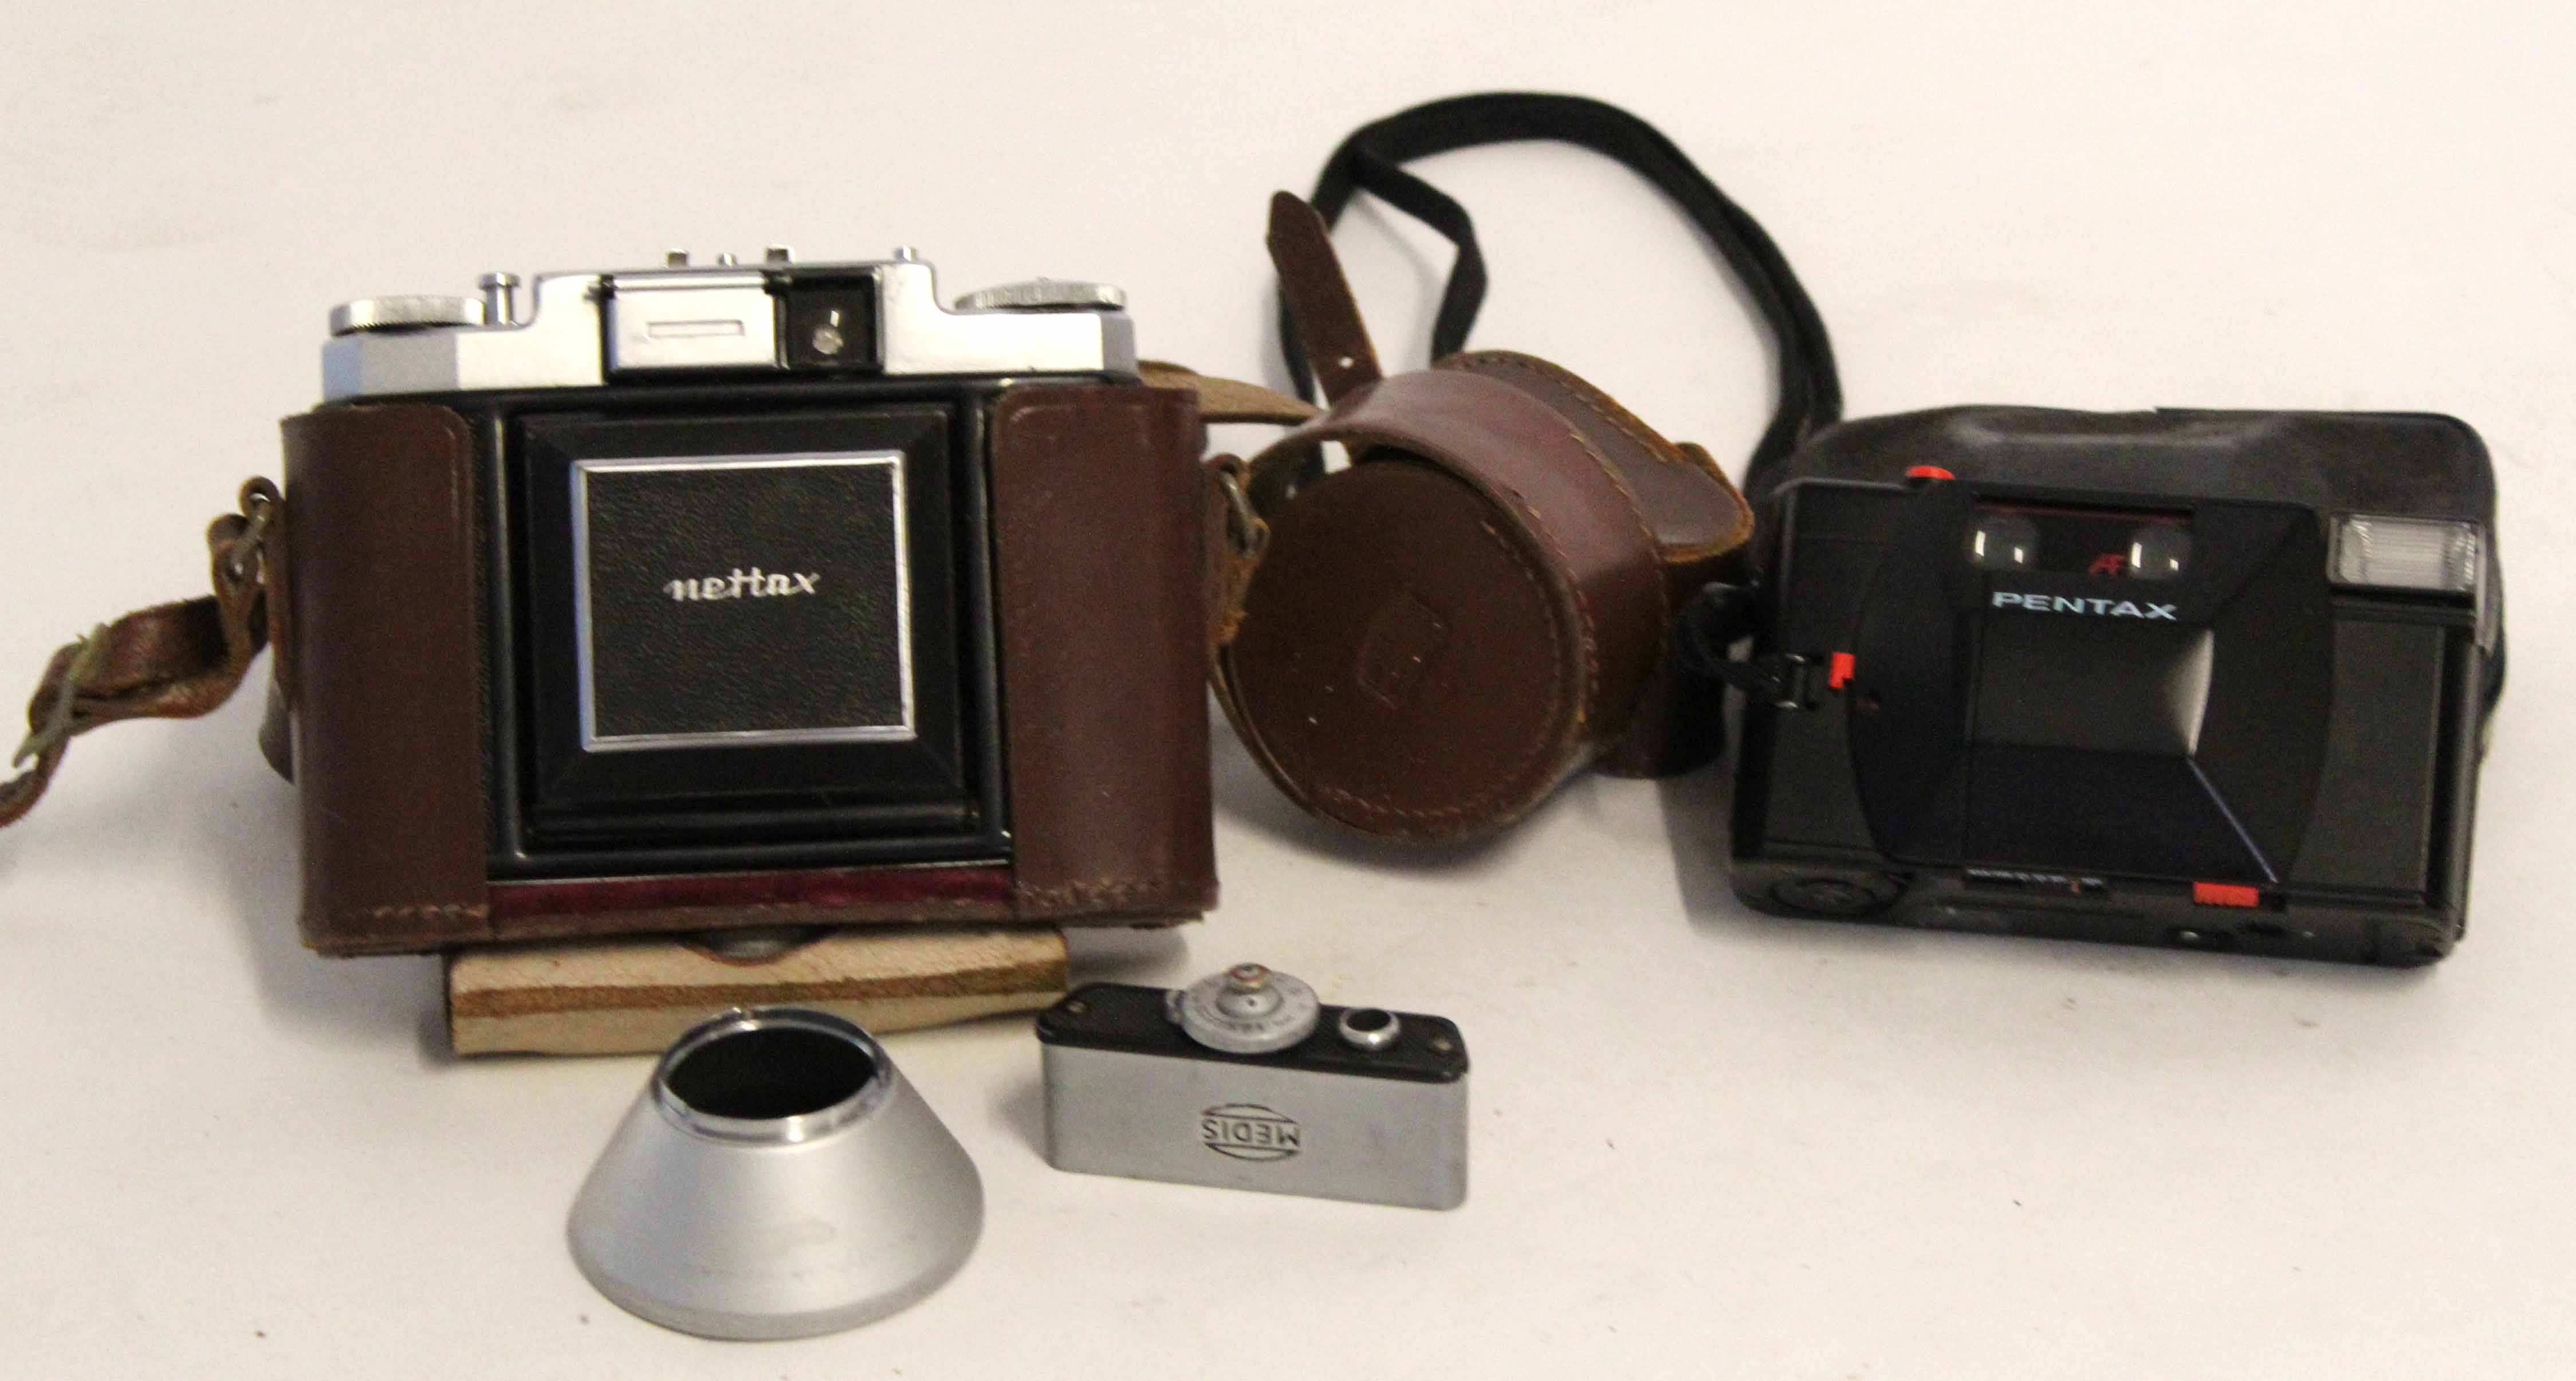 Leather cased Nettax 35mm camera together with a Pentax PC35 AF compact camera (2)